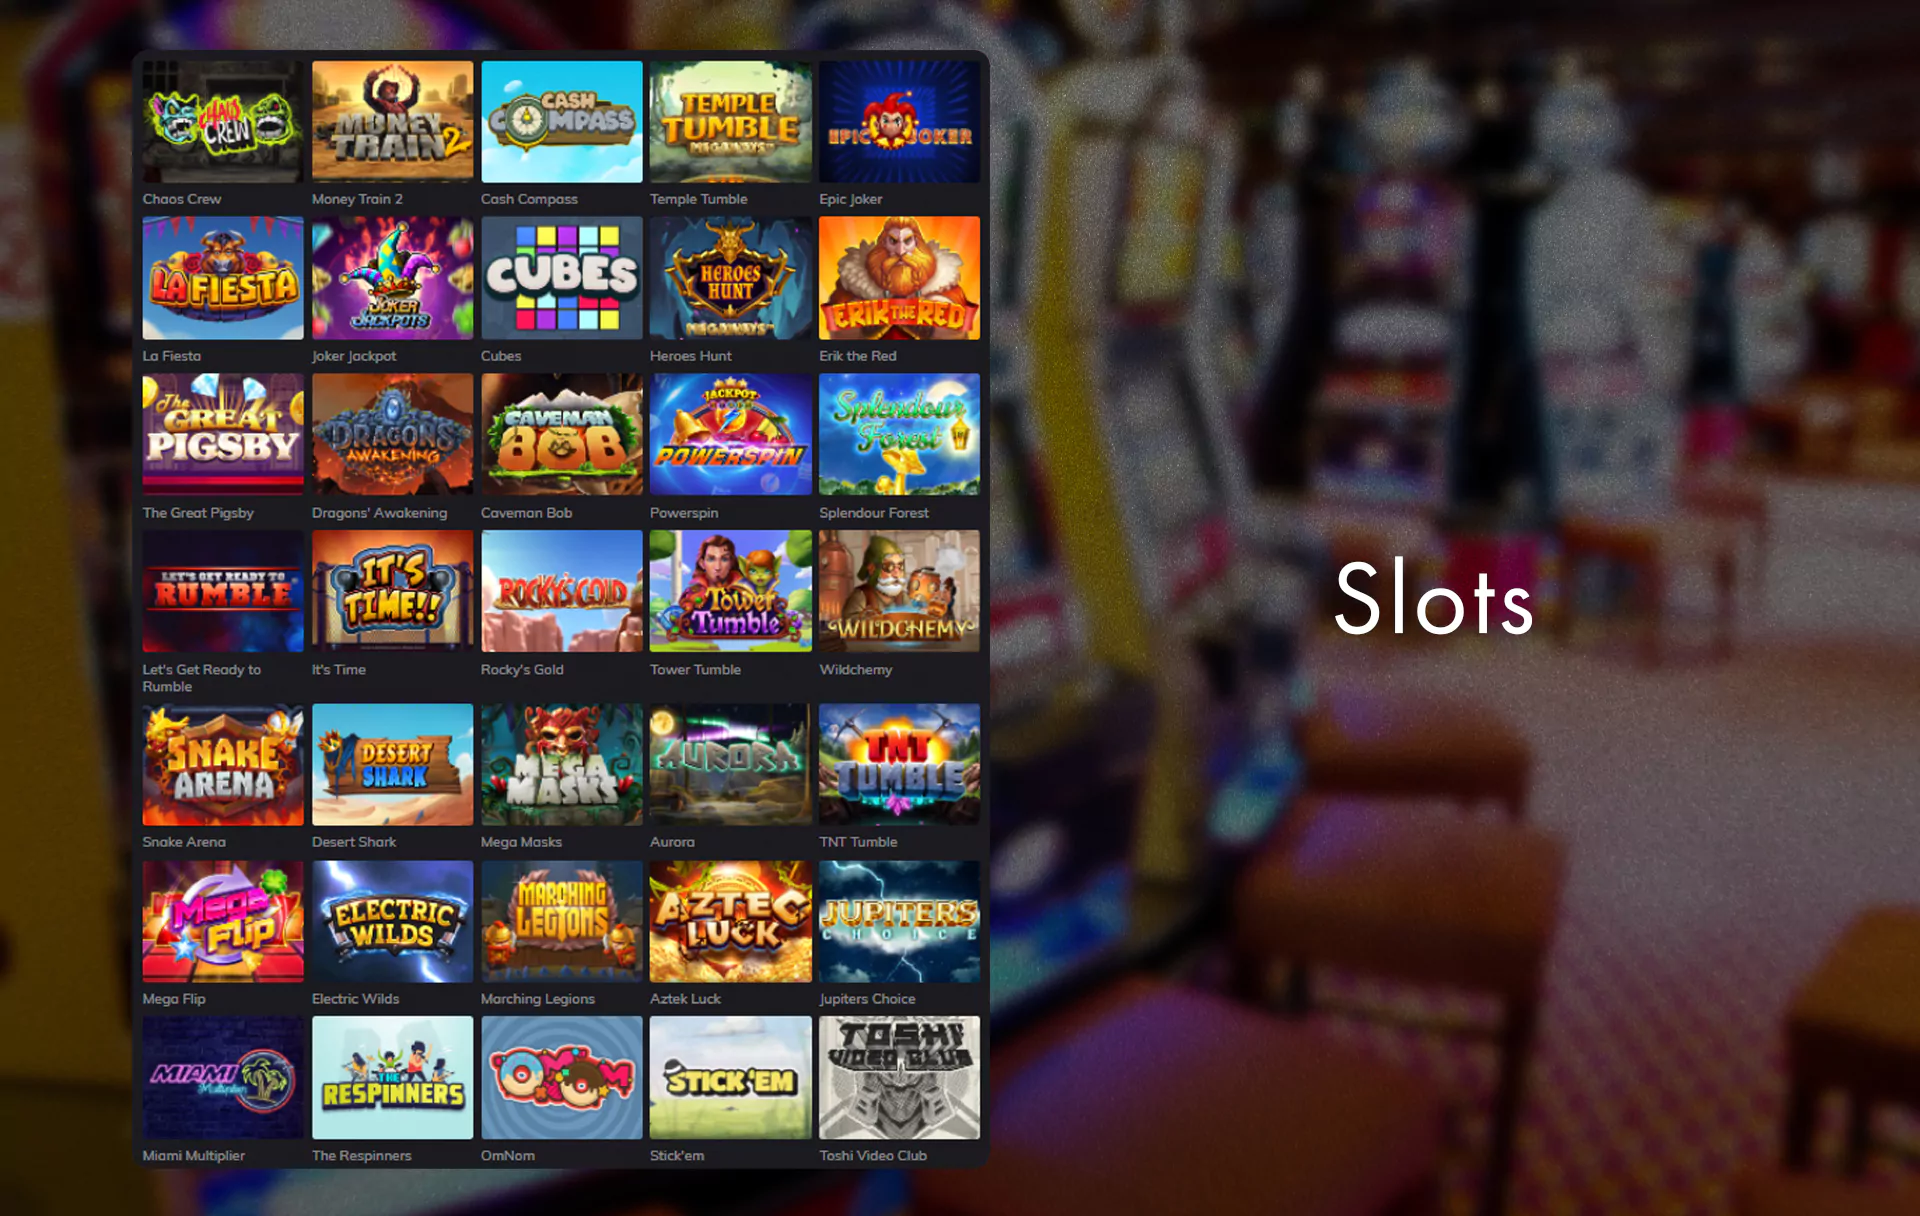 In the section of Casino, you can find slots and other games.